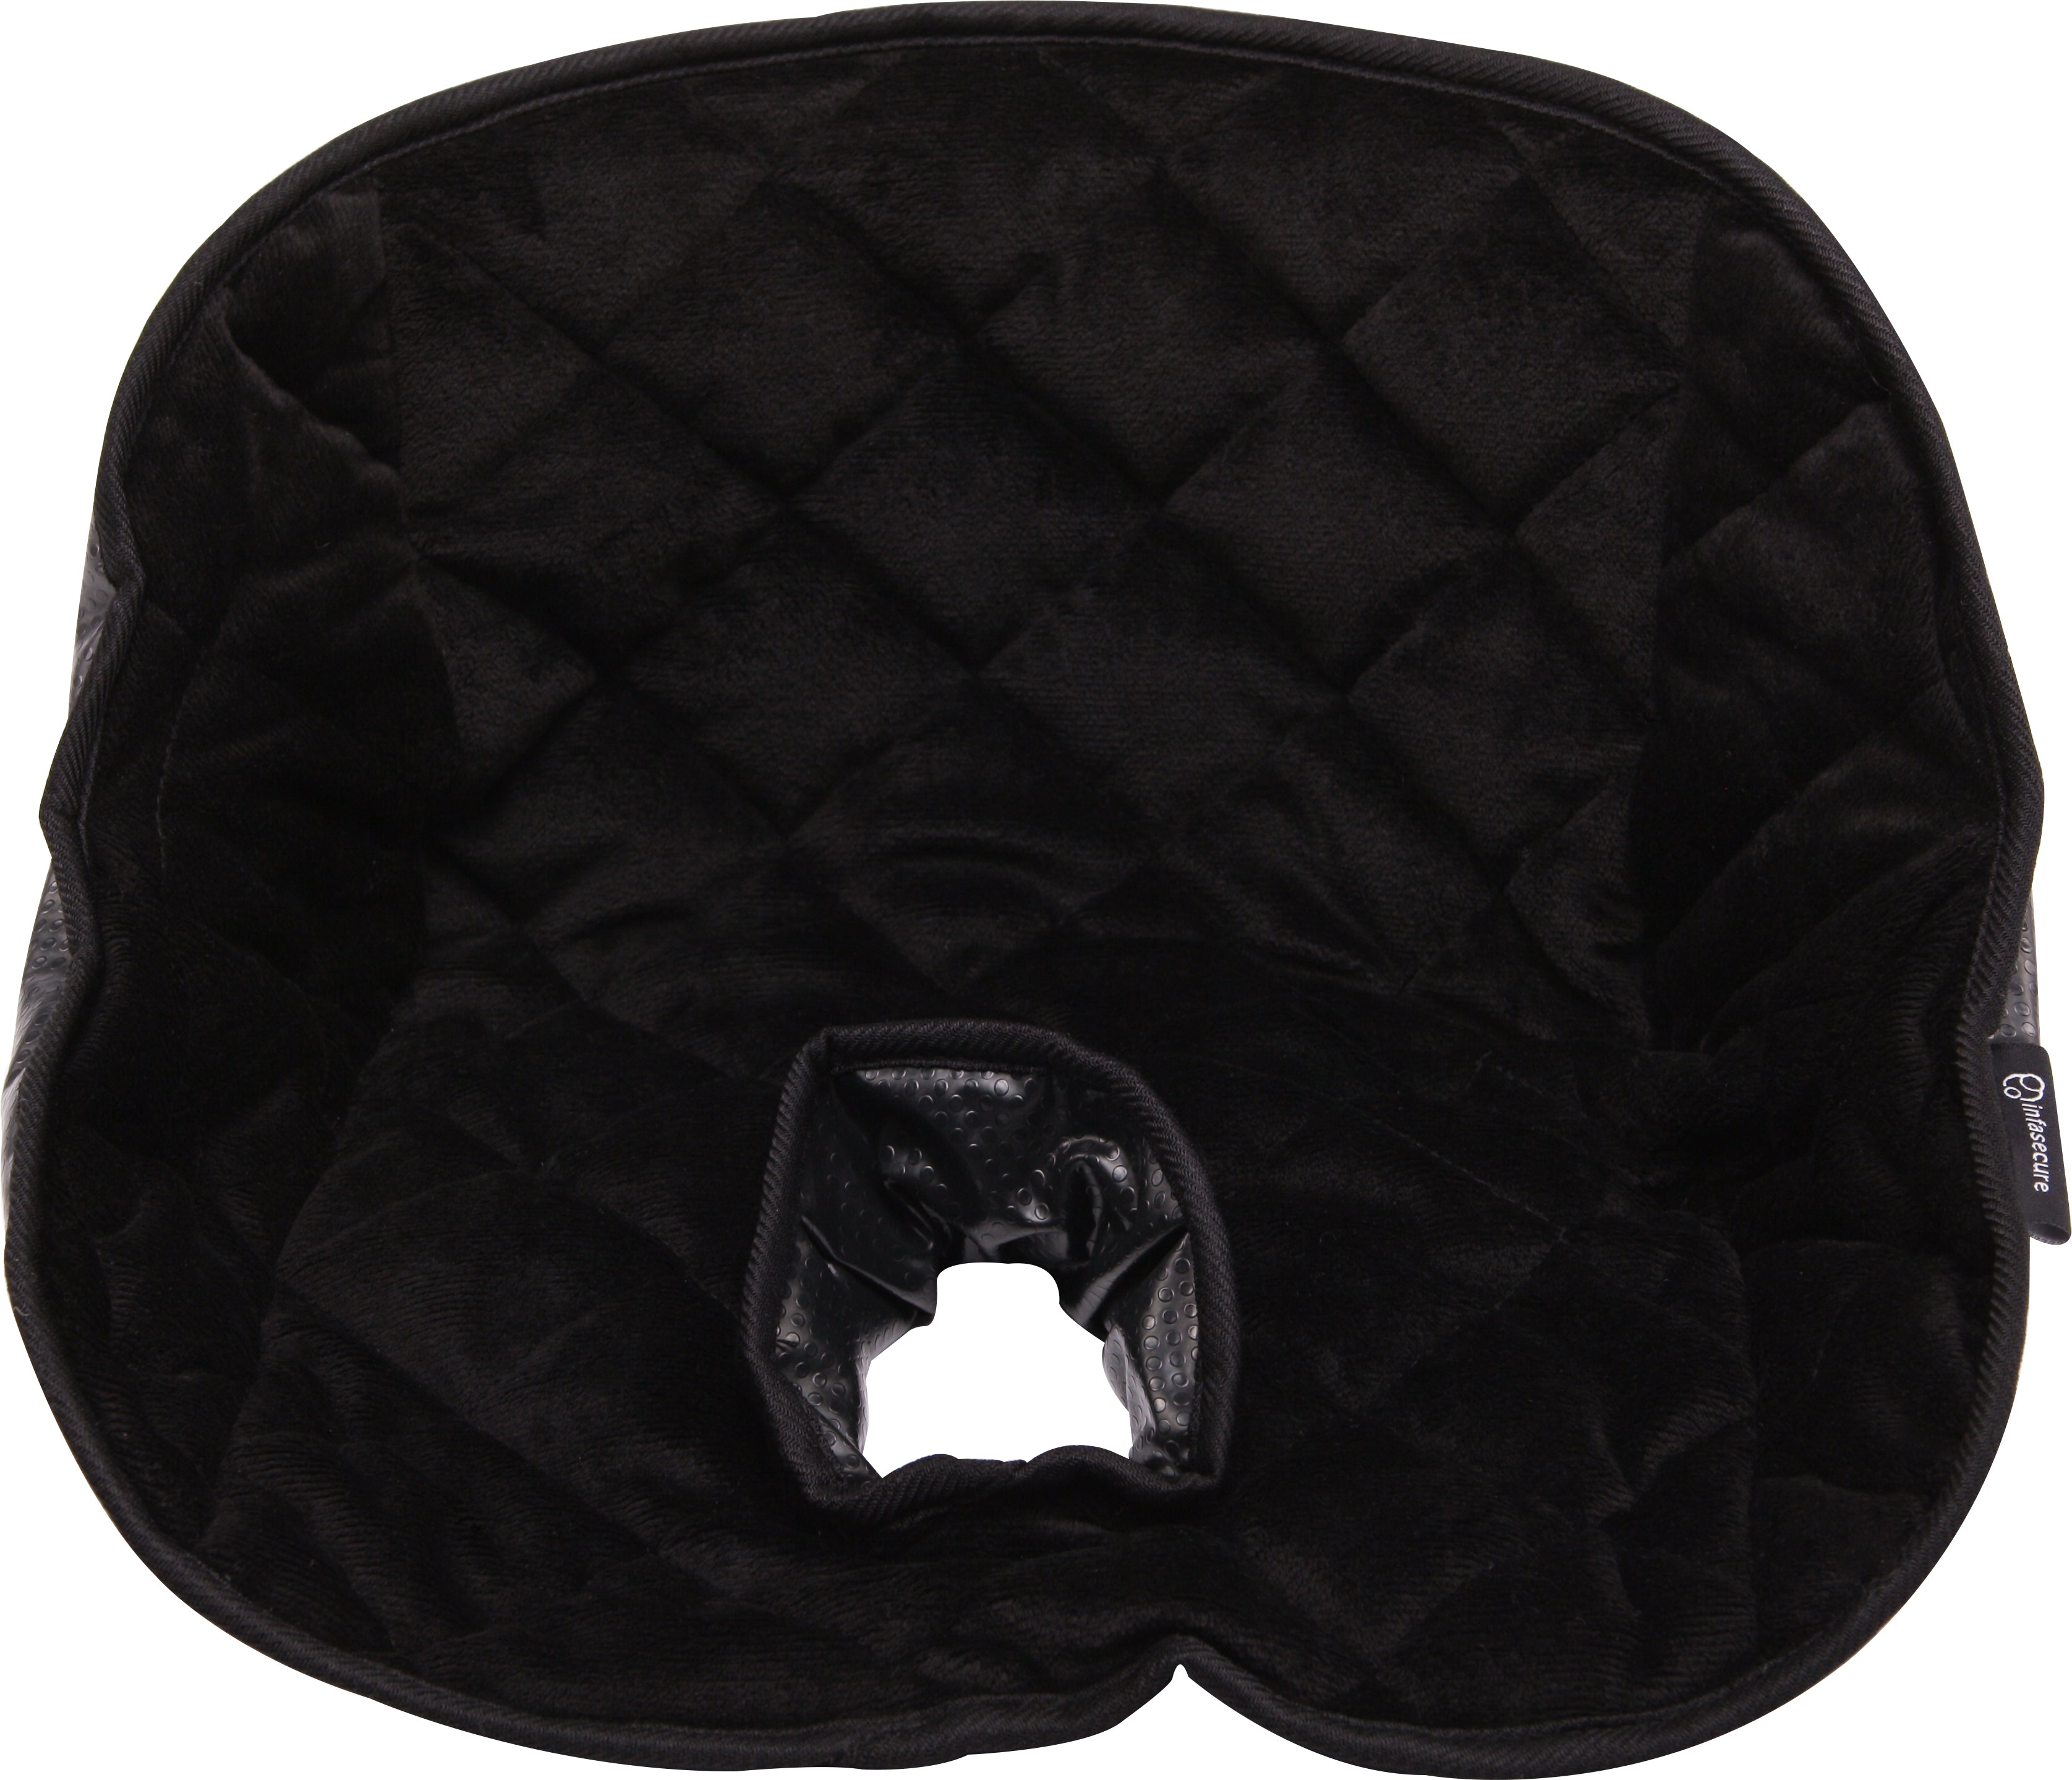 InfaSecure Deluxe Piddle Pad - Black